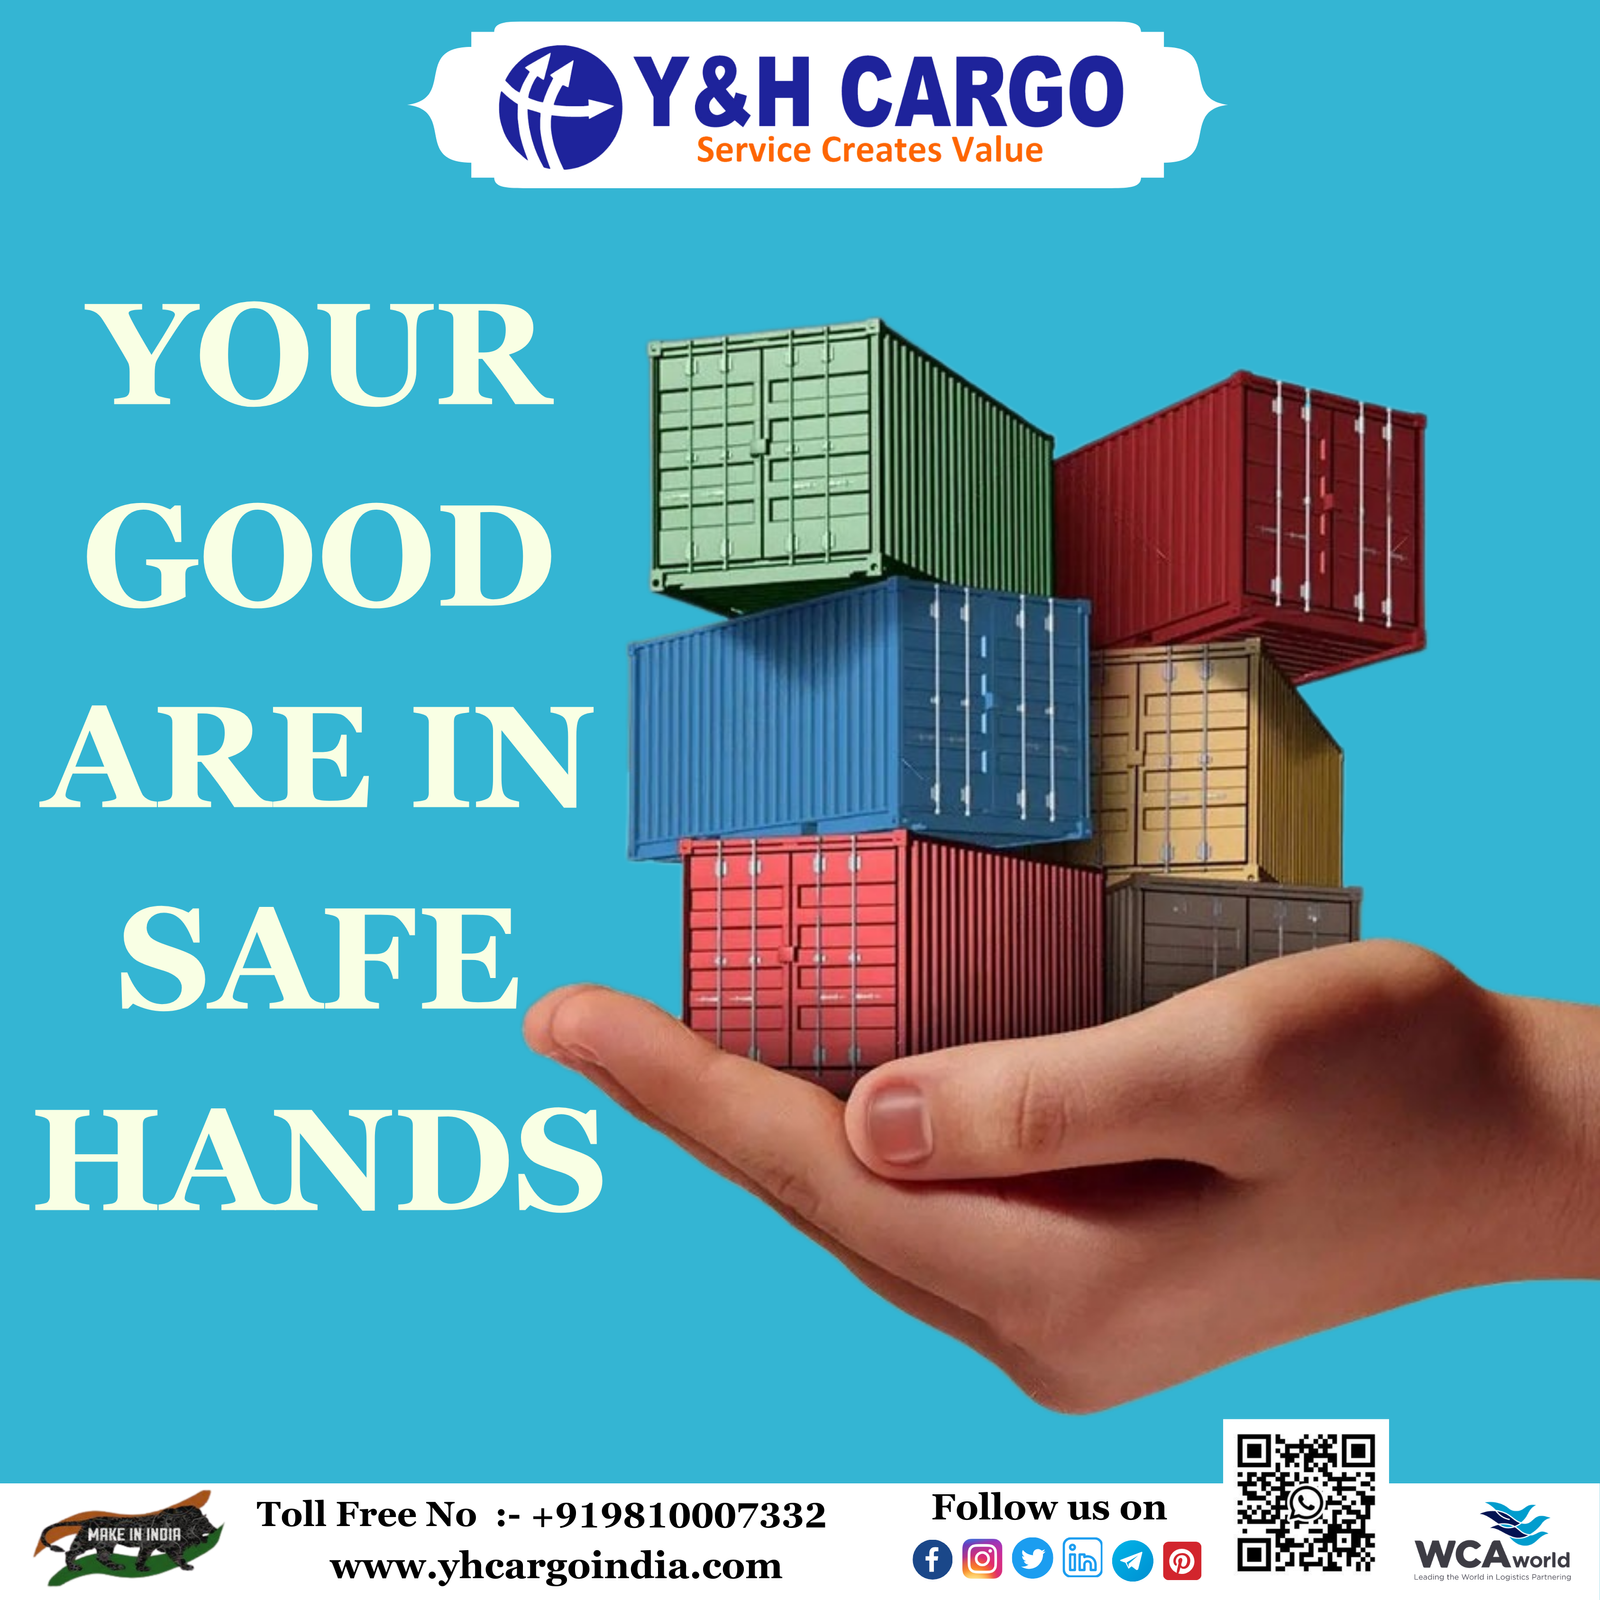 Your Goods Are in Safe Hands with Y&H Cargo ..